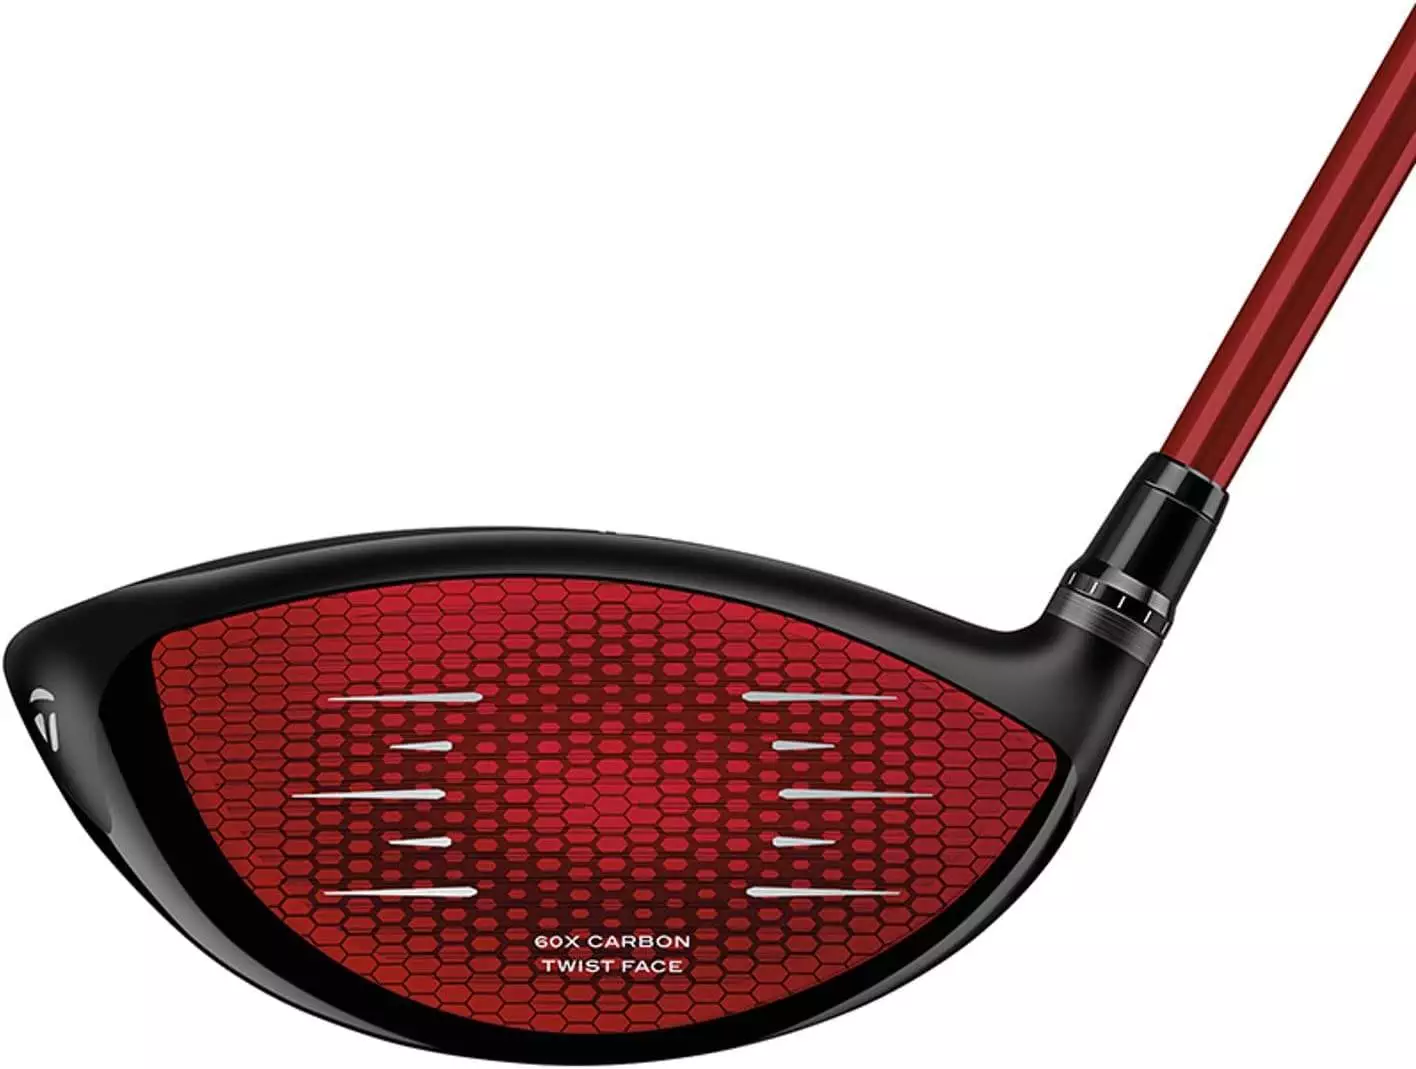 The Epic New Taylormade Stealth 2 Driver